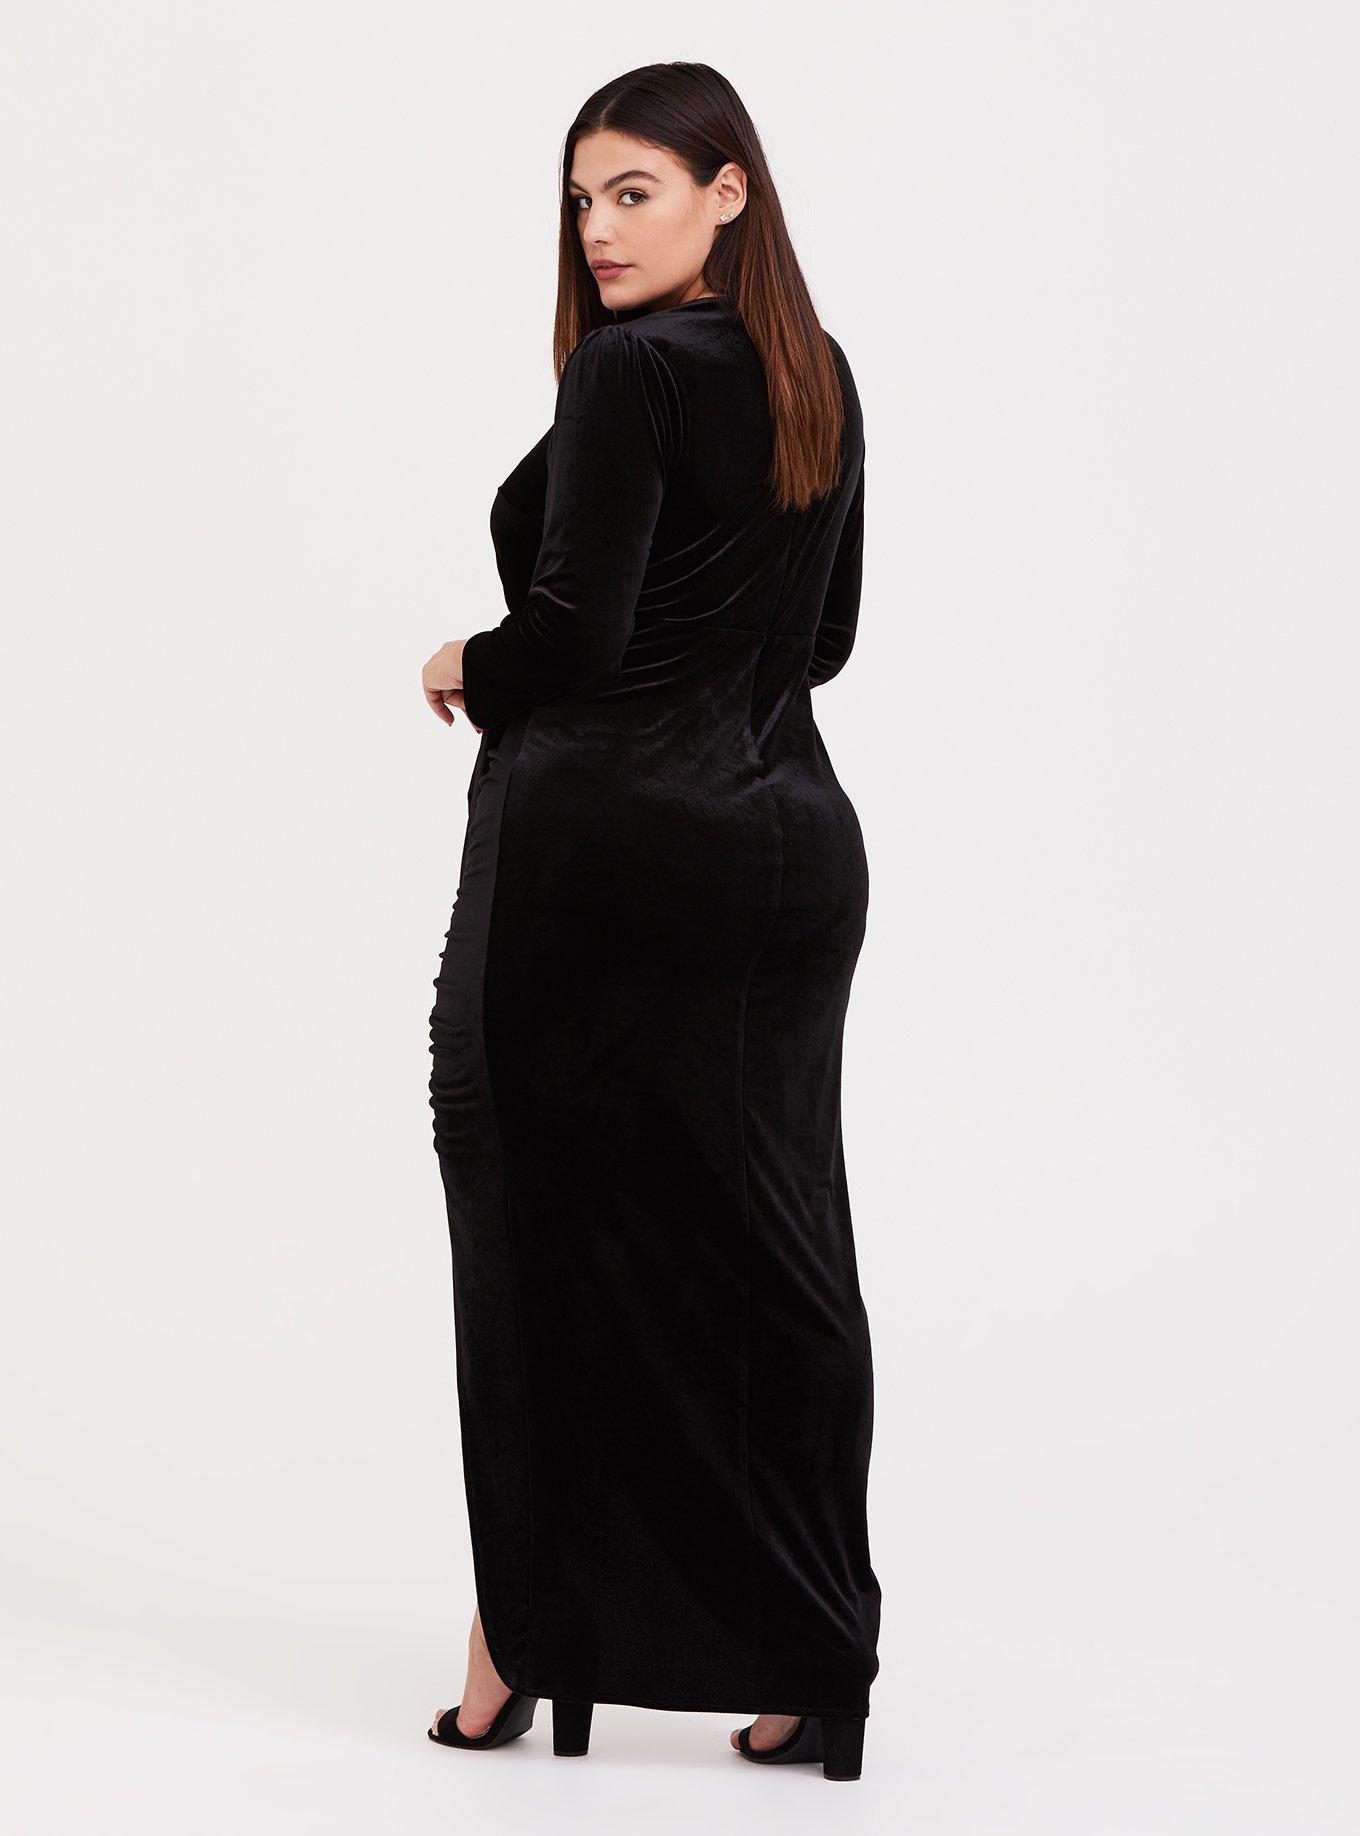 New Plus Size Dresses for Curvy Women, Long Maxi Clothes Party Casual  V-Neck 3/4 Sleeve Dress,Ture to Size. (US, Numeric, 14, 16, Plus, Regular,  Black) at  Women's Clothing store